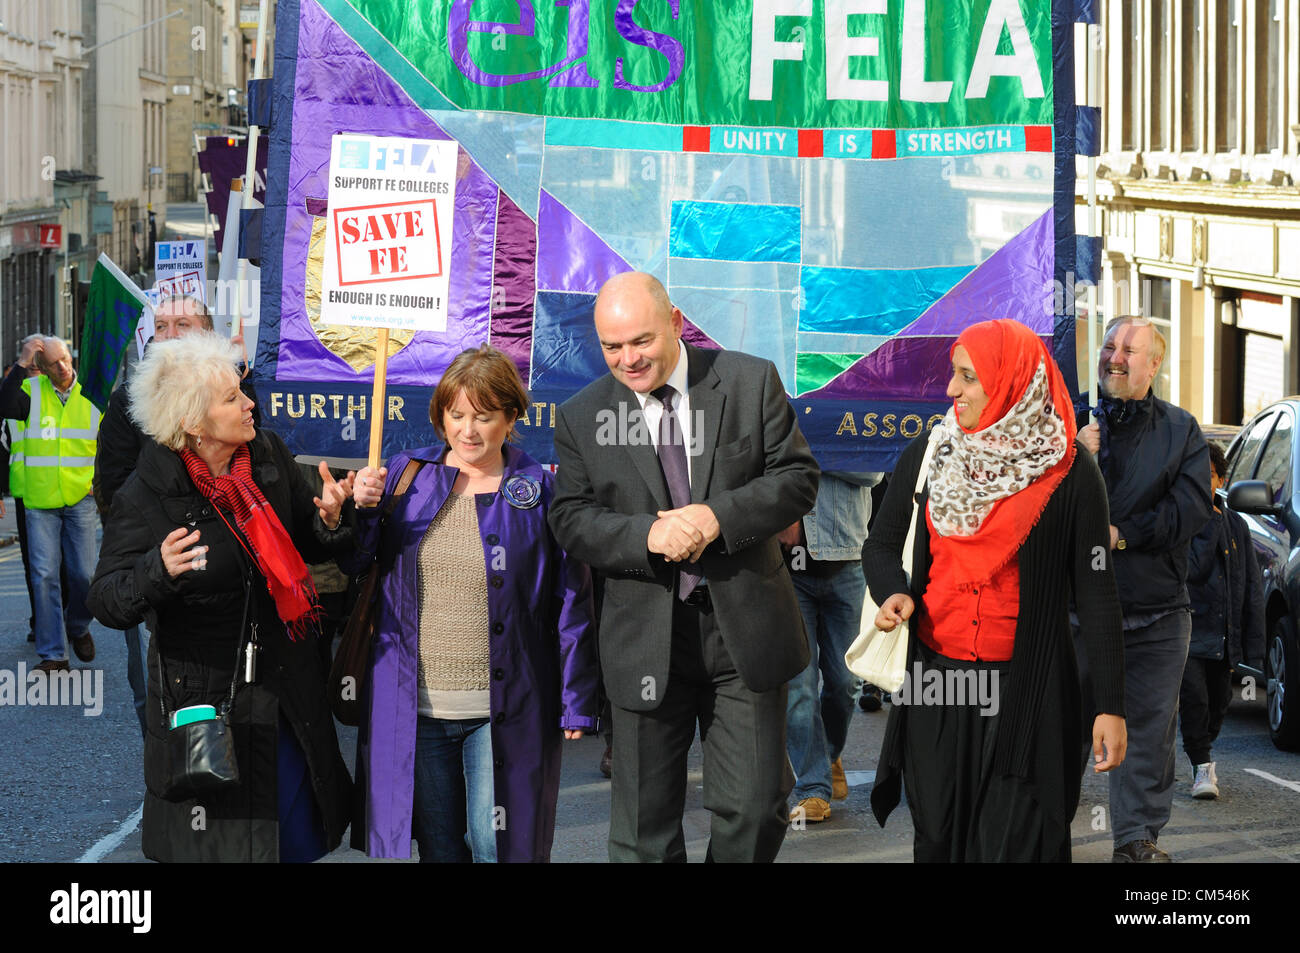 Glasgow, Scotland, UK. Saturday 6th October. EIS teaching members march though Glasgow city centre in protest against proposed cuts to further education colleges. Larry Flanagan, Susan Quinn, Penny Gower in attendance. Stock Photo